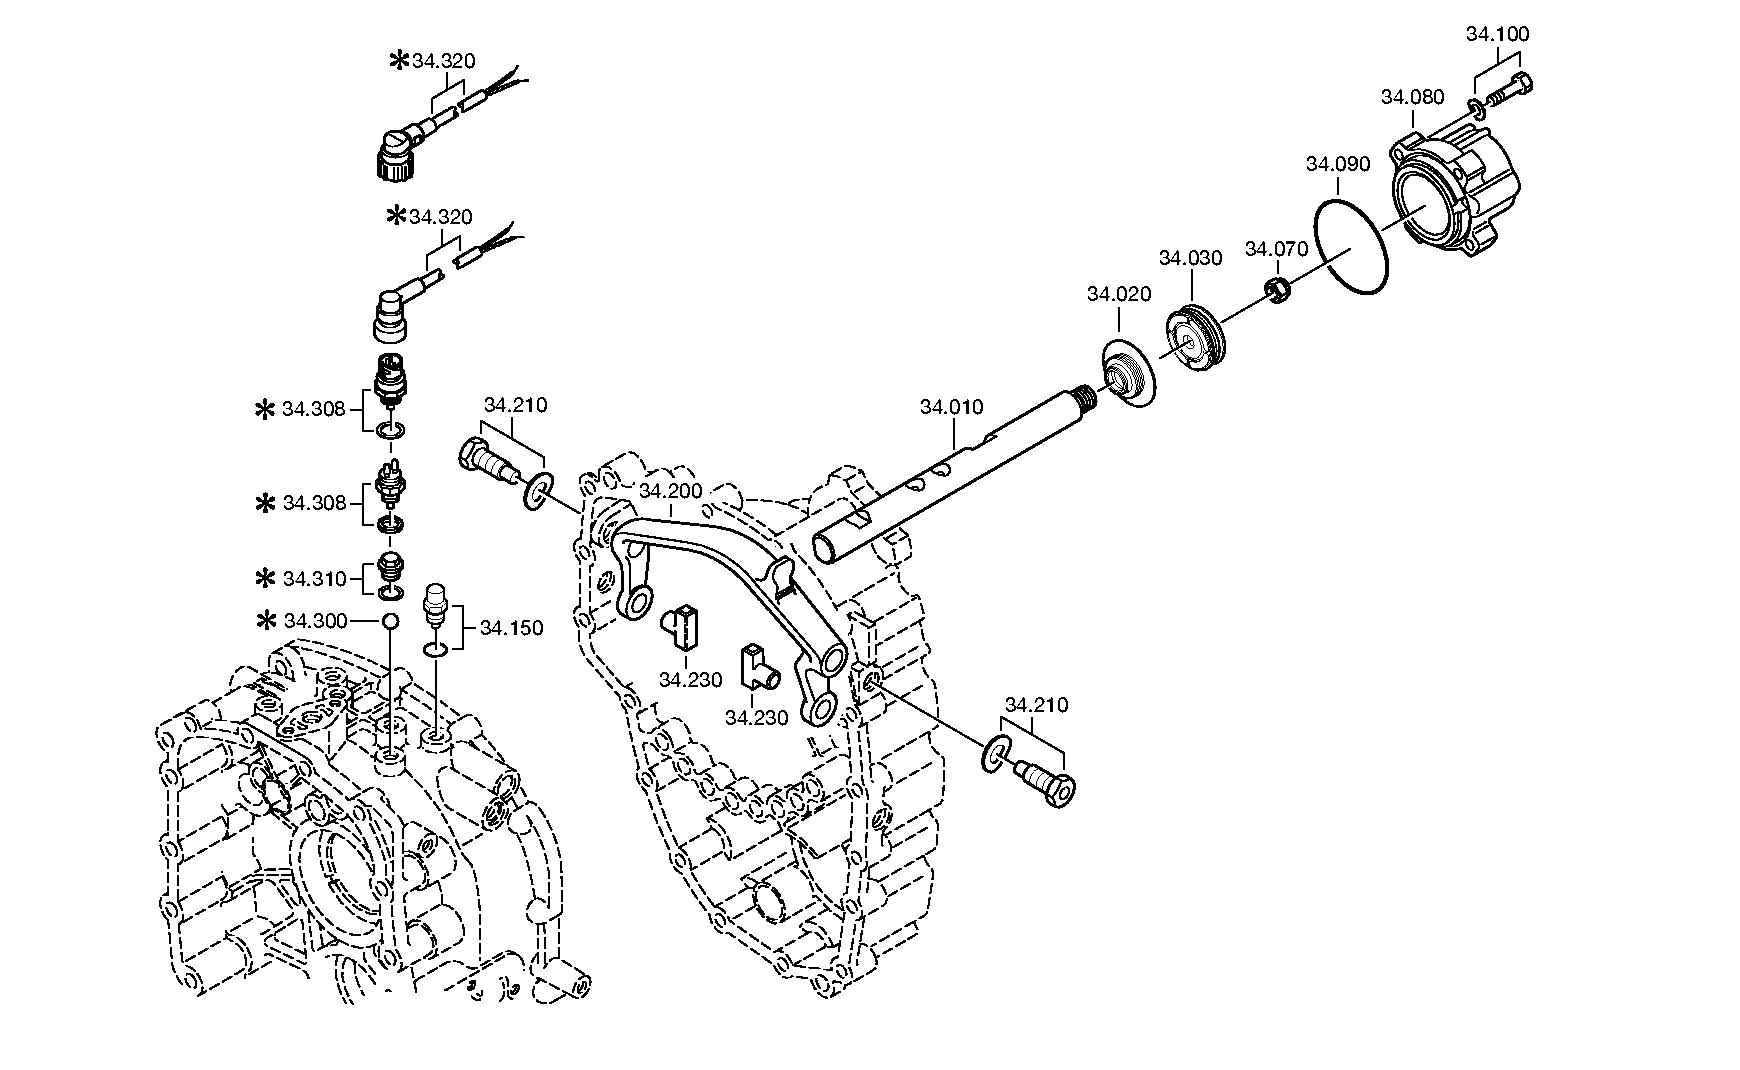 drawing for ASIA MOTORS CO. INC. 409-01-0380 - FLANGE PACKING (figure 2)